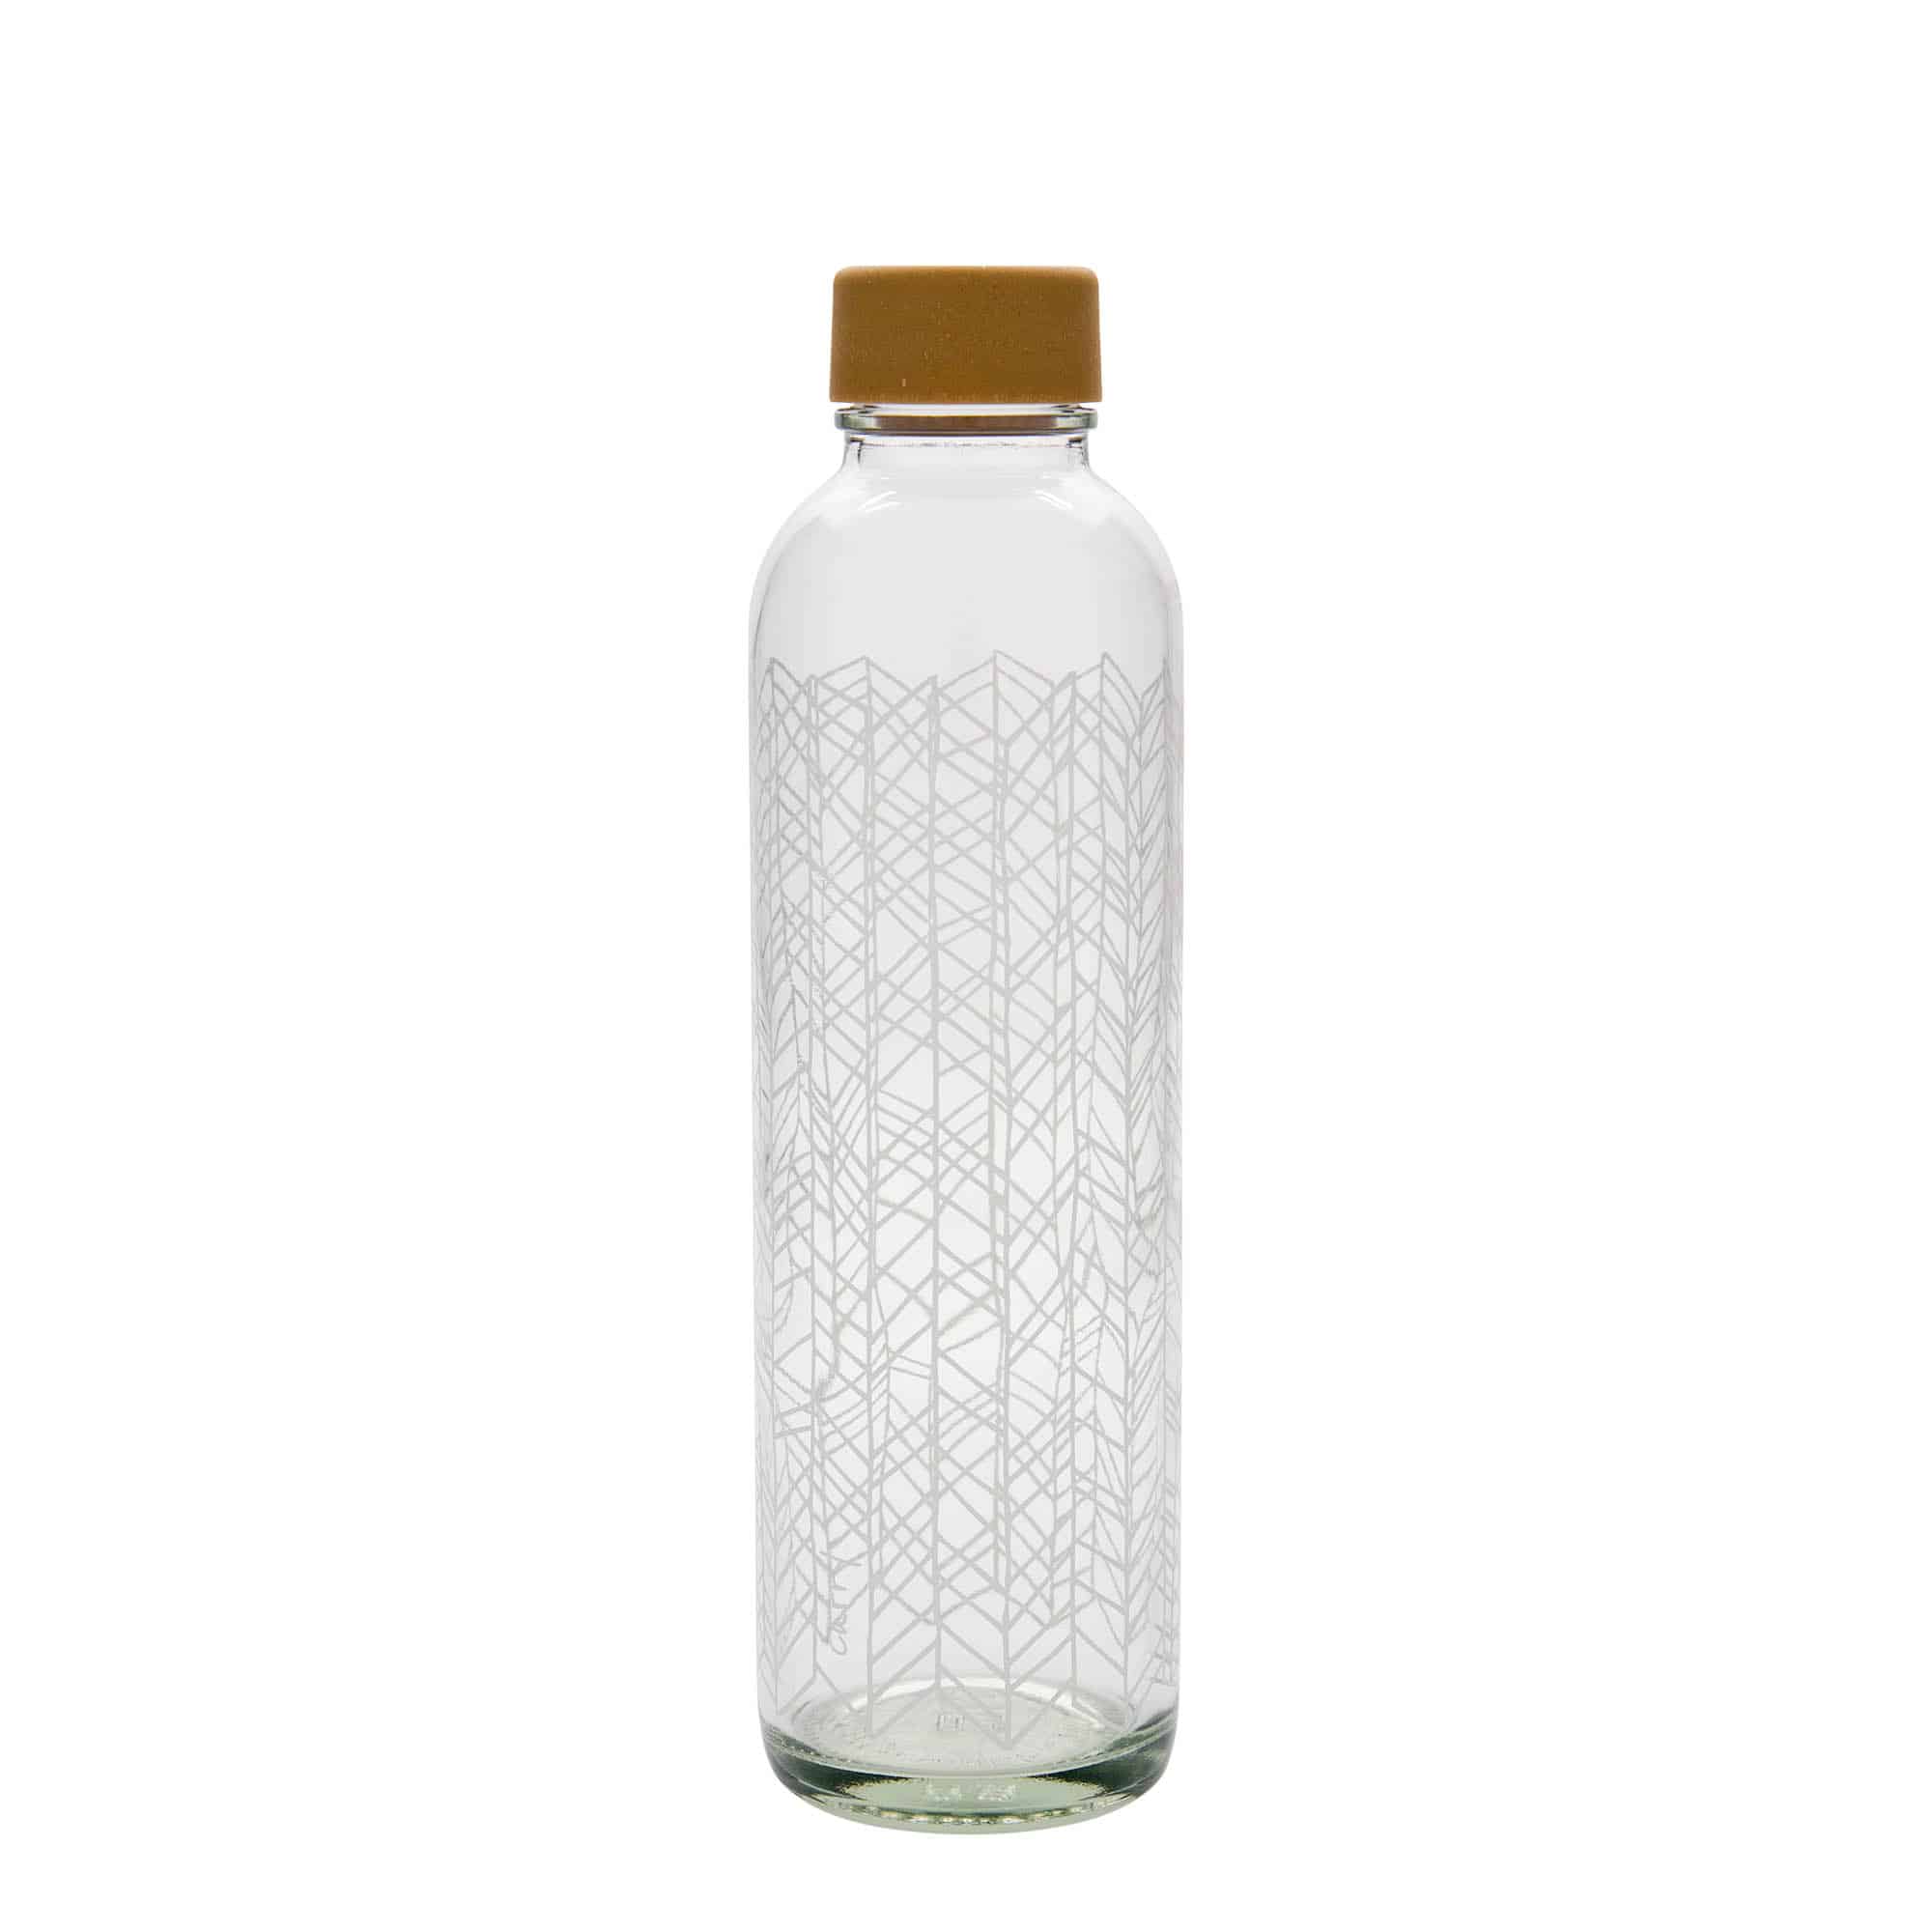 700 ml water bottle ‘CARRY Bottle’, print: Structure of Life, closure: screw cap